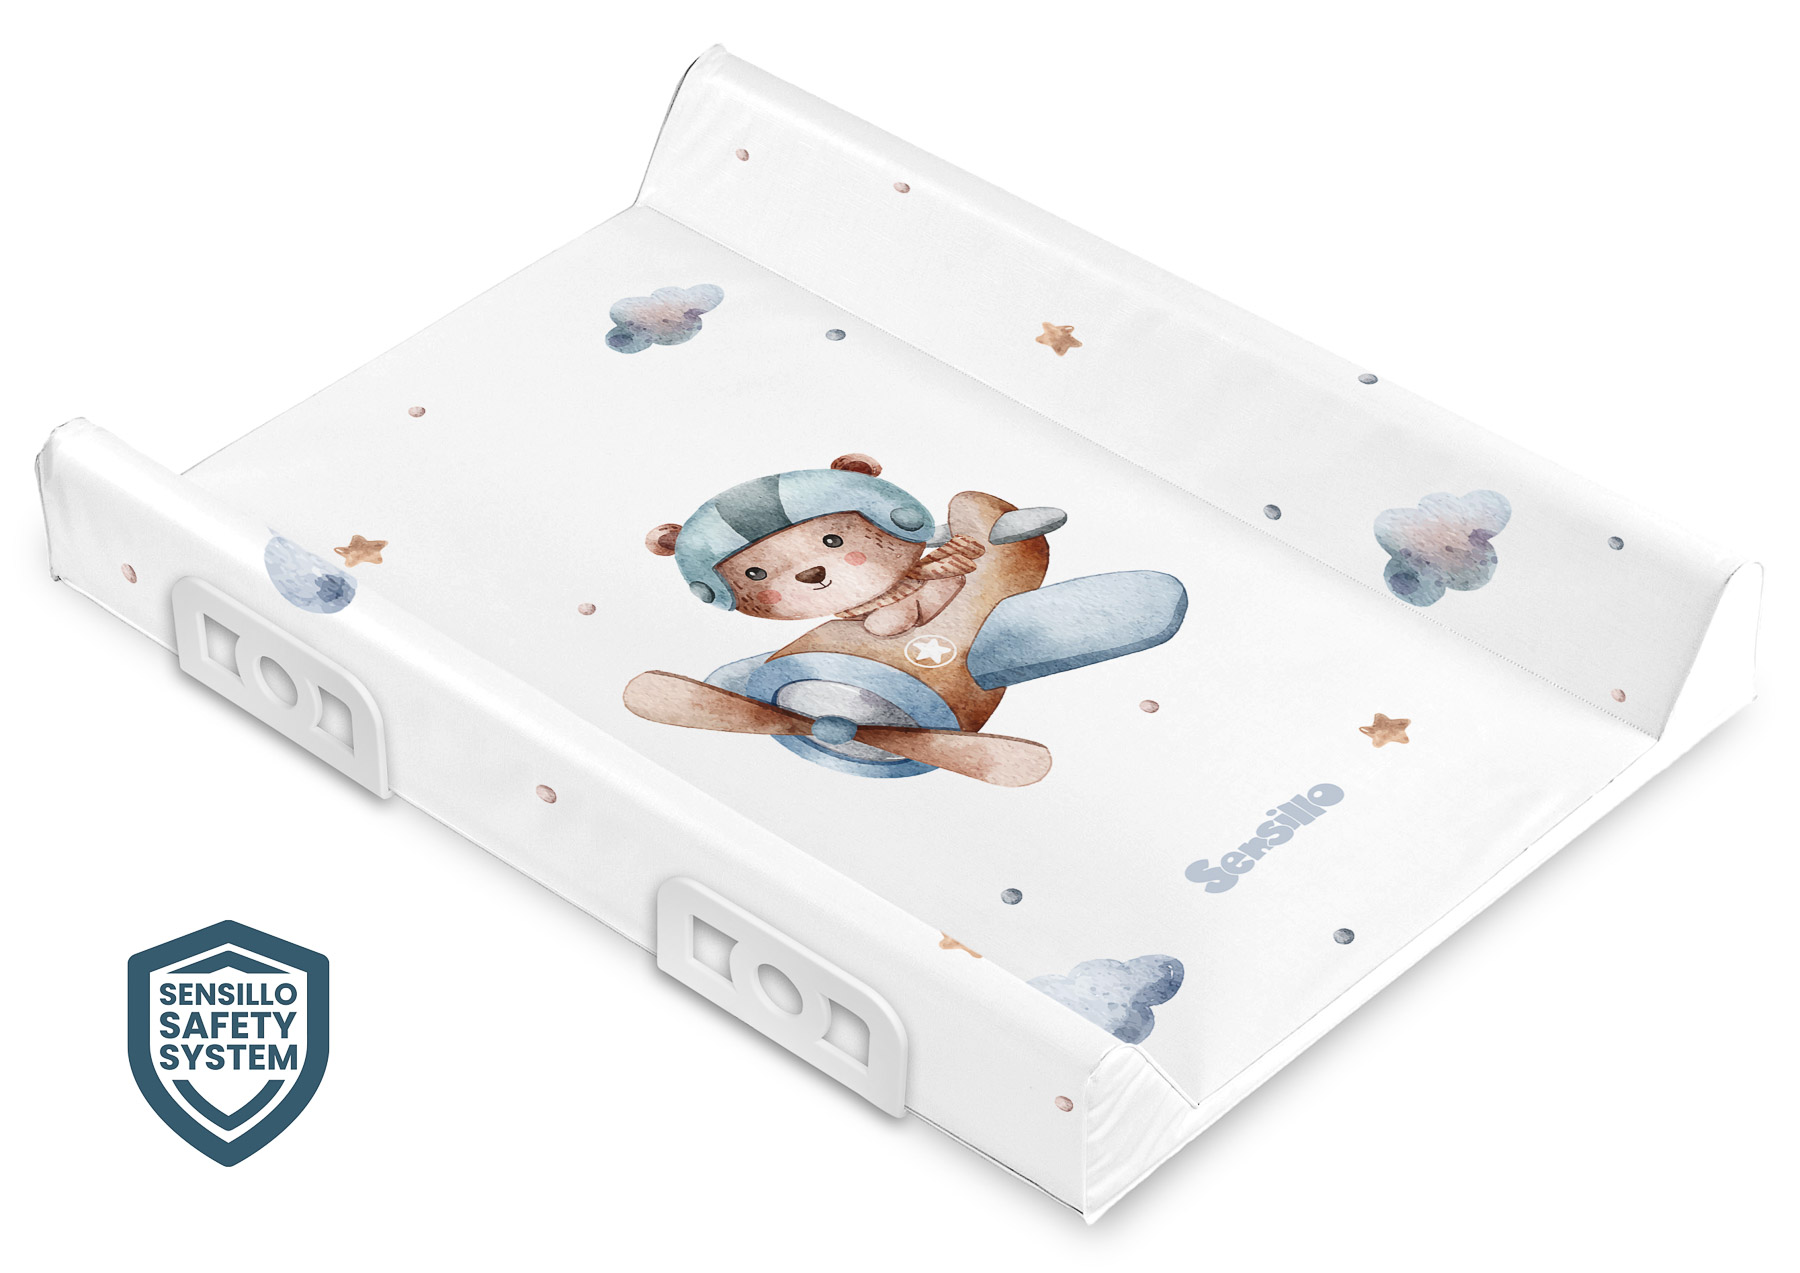 Changing Pad SAFETY SYSTEM SKY – AEROPPLANE WITH TEDDY